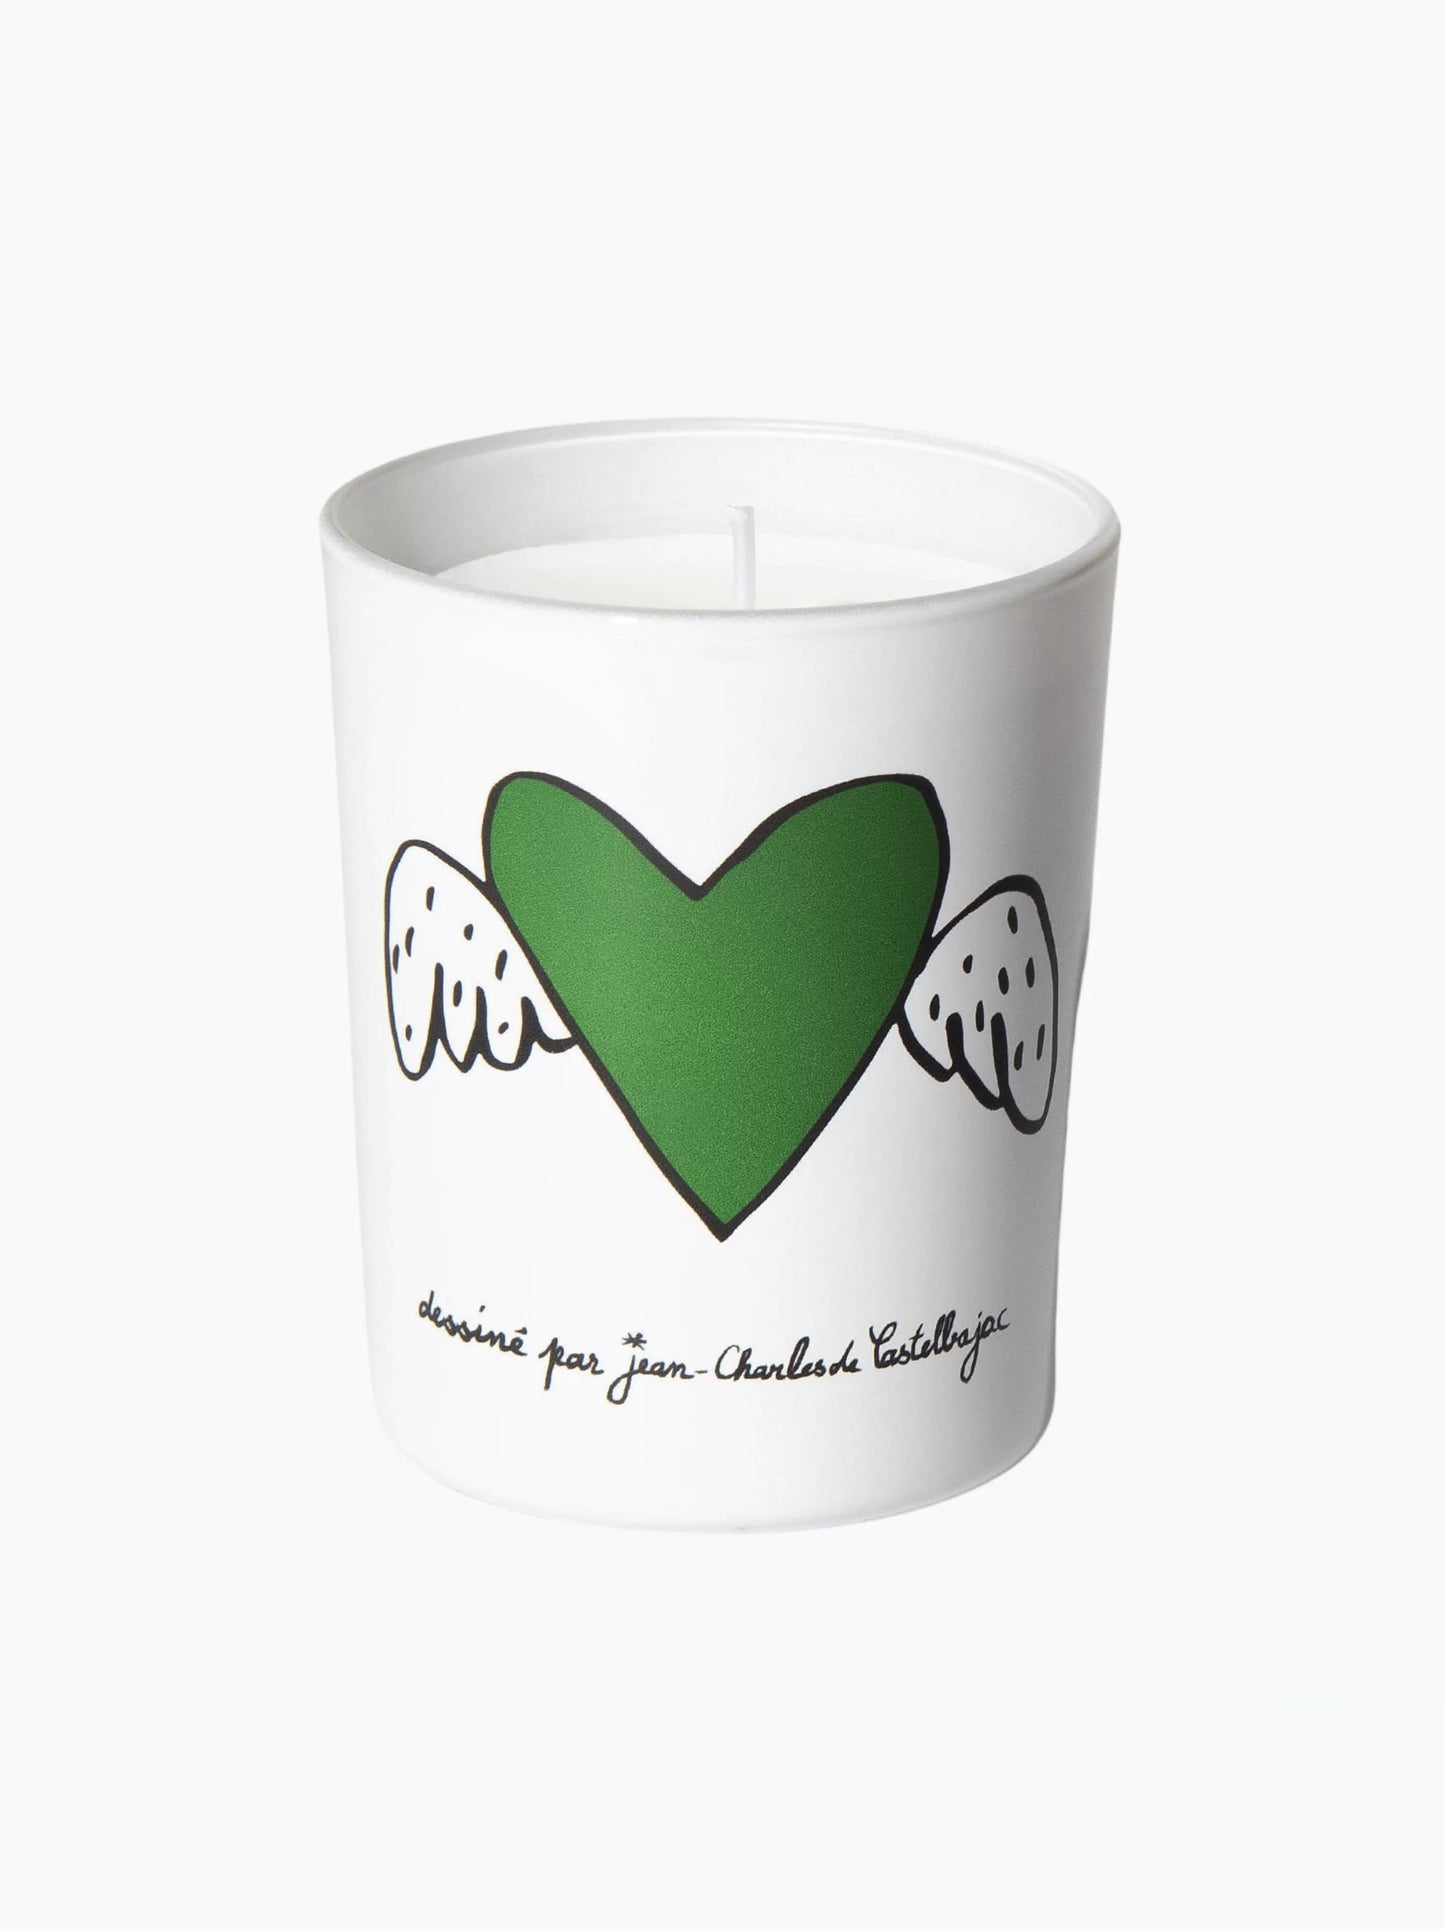 Blue and Green La Flamme JCC Candle